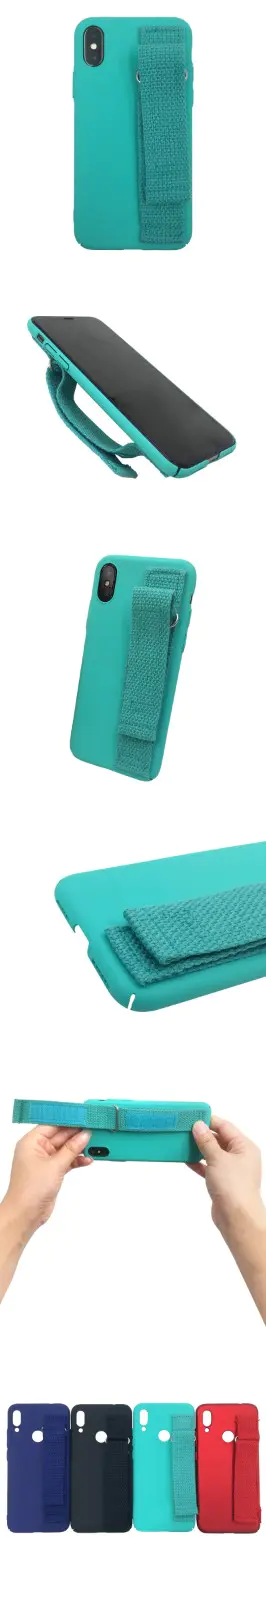 microfiber phone case suppliers from China for home